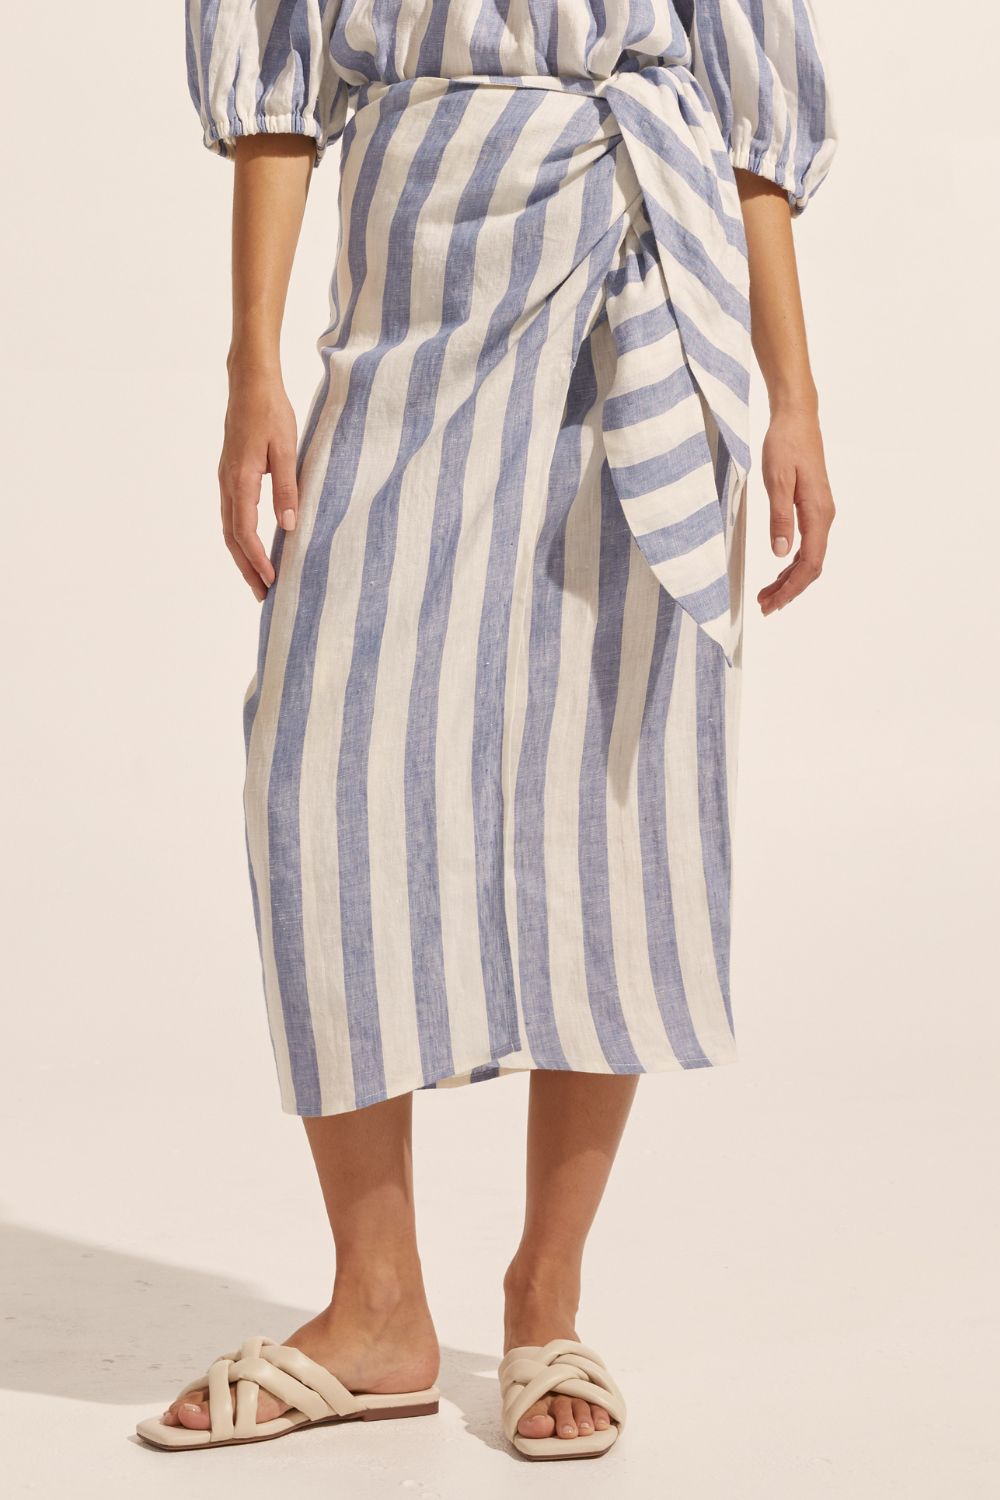 blue and white stripe, midi skirt, side tie, skirt, front view